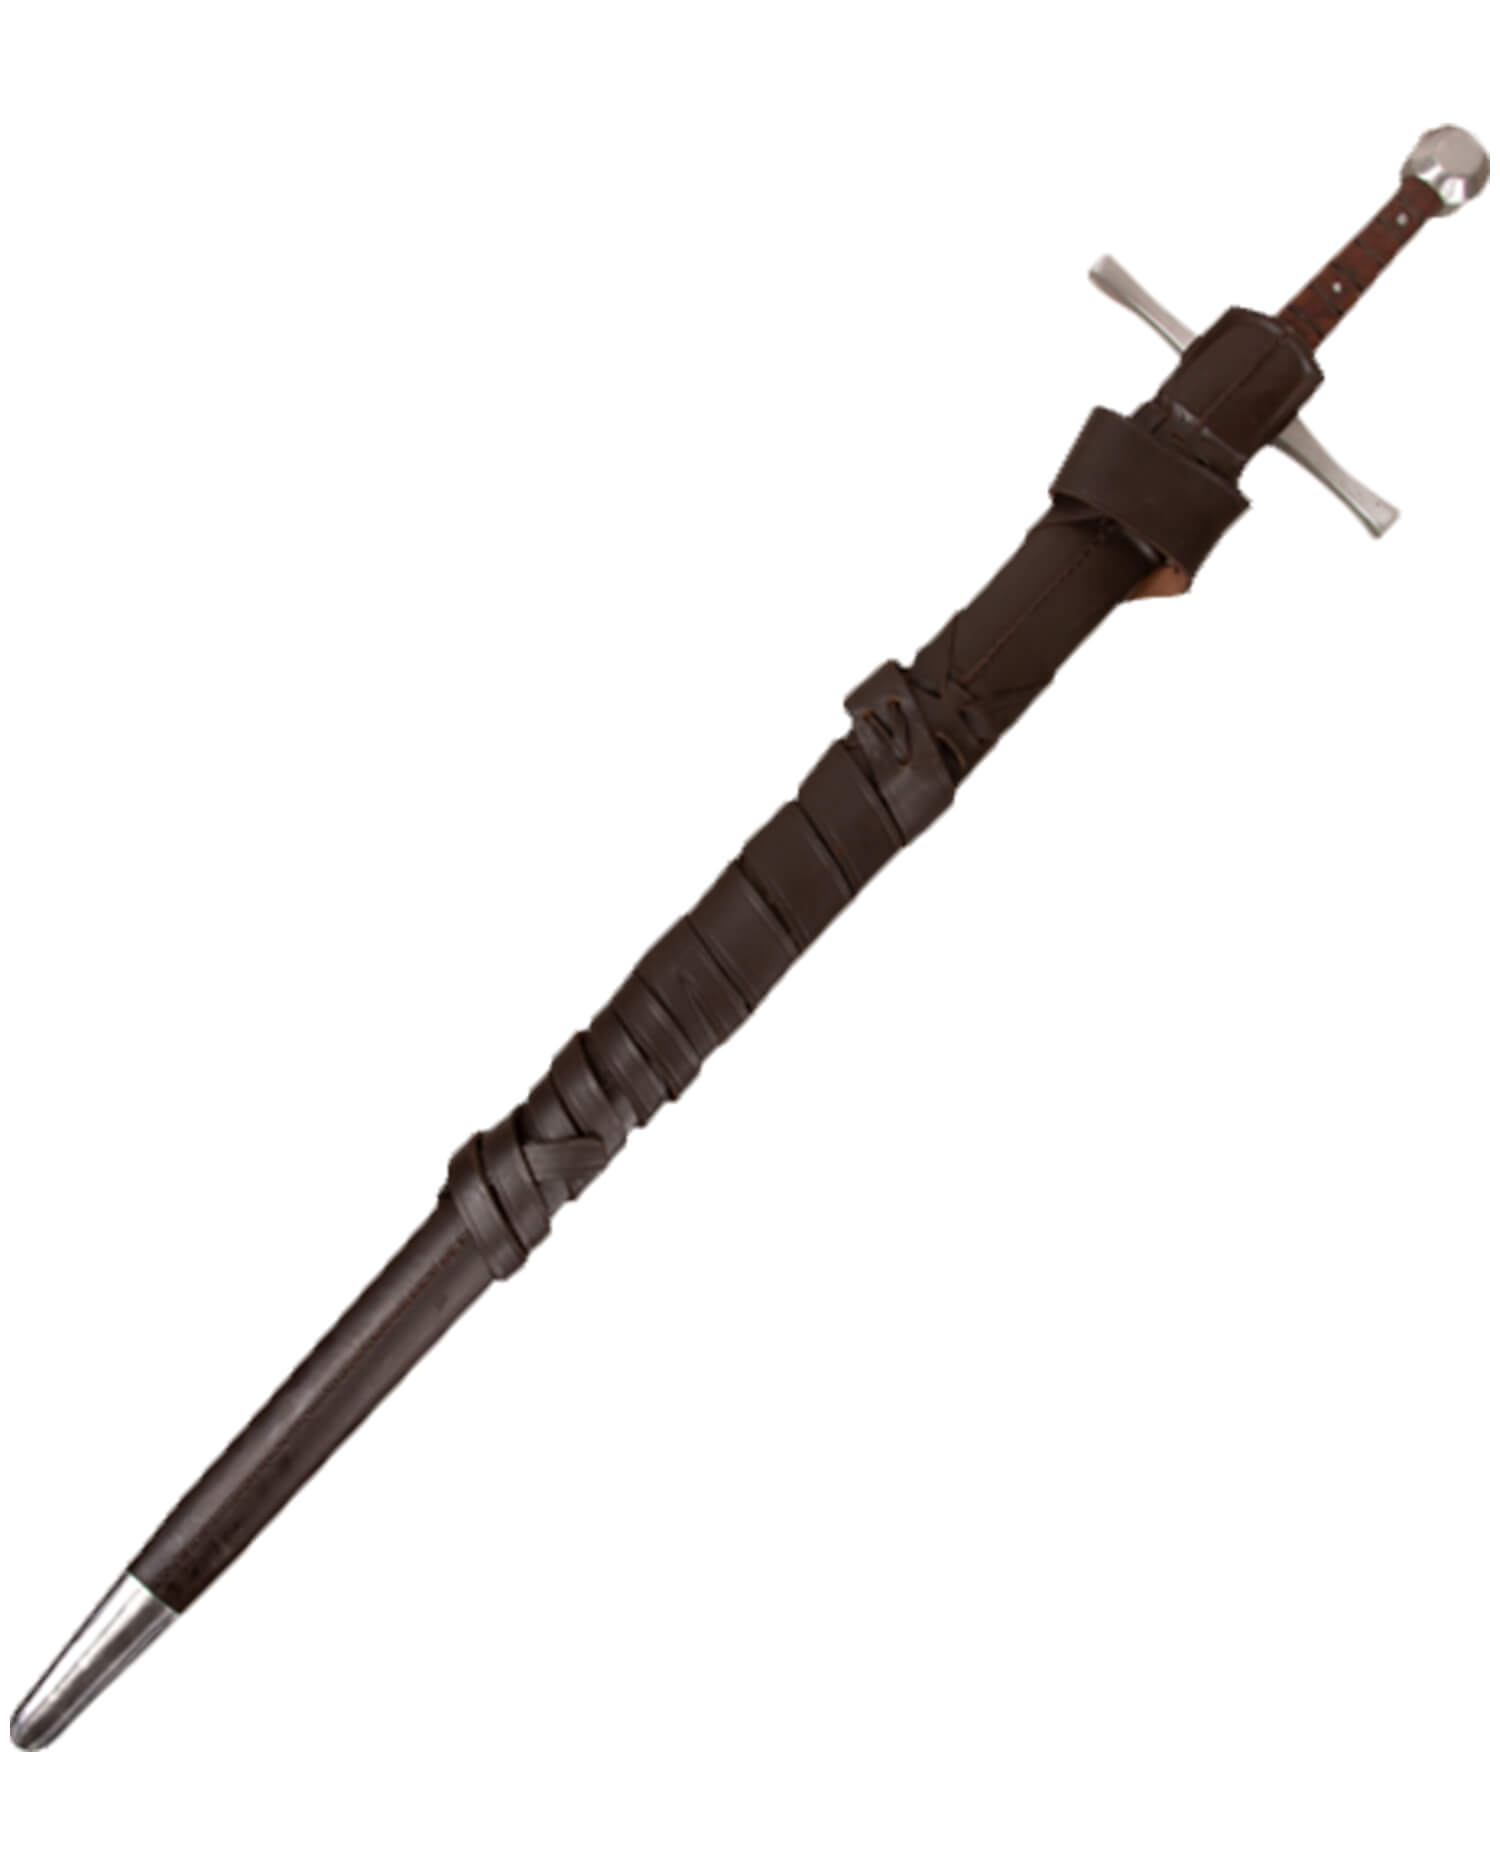 Oswald stage fight sword